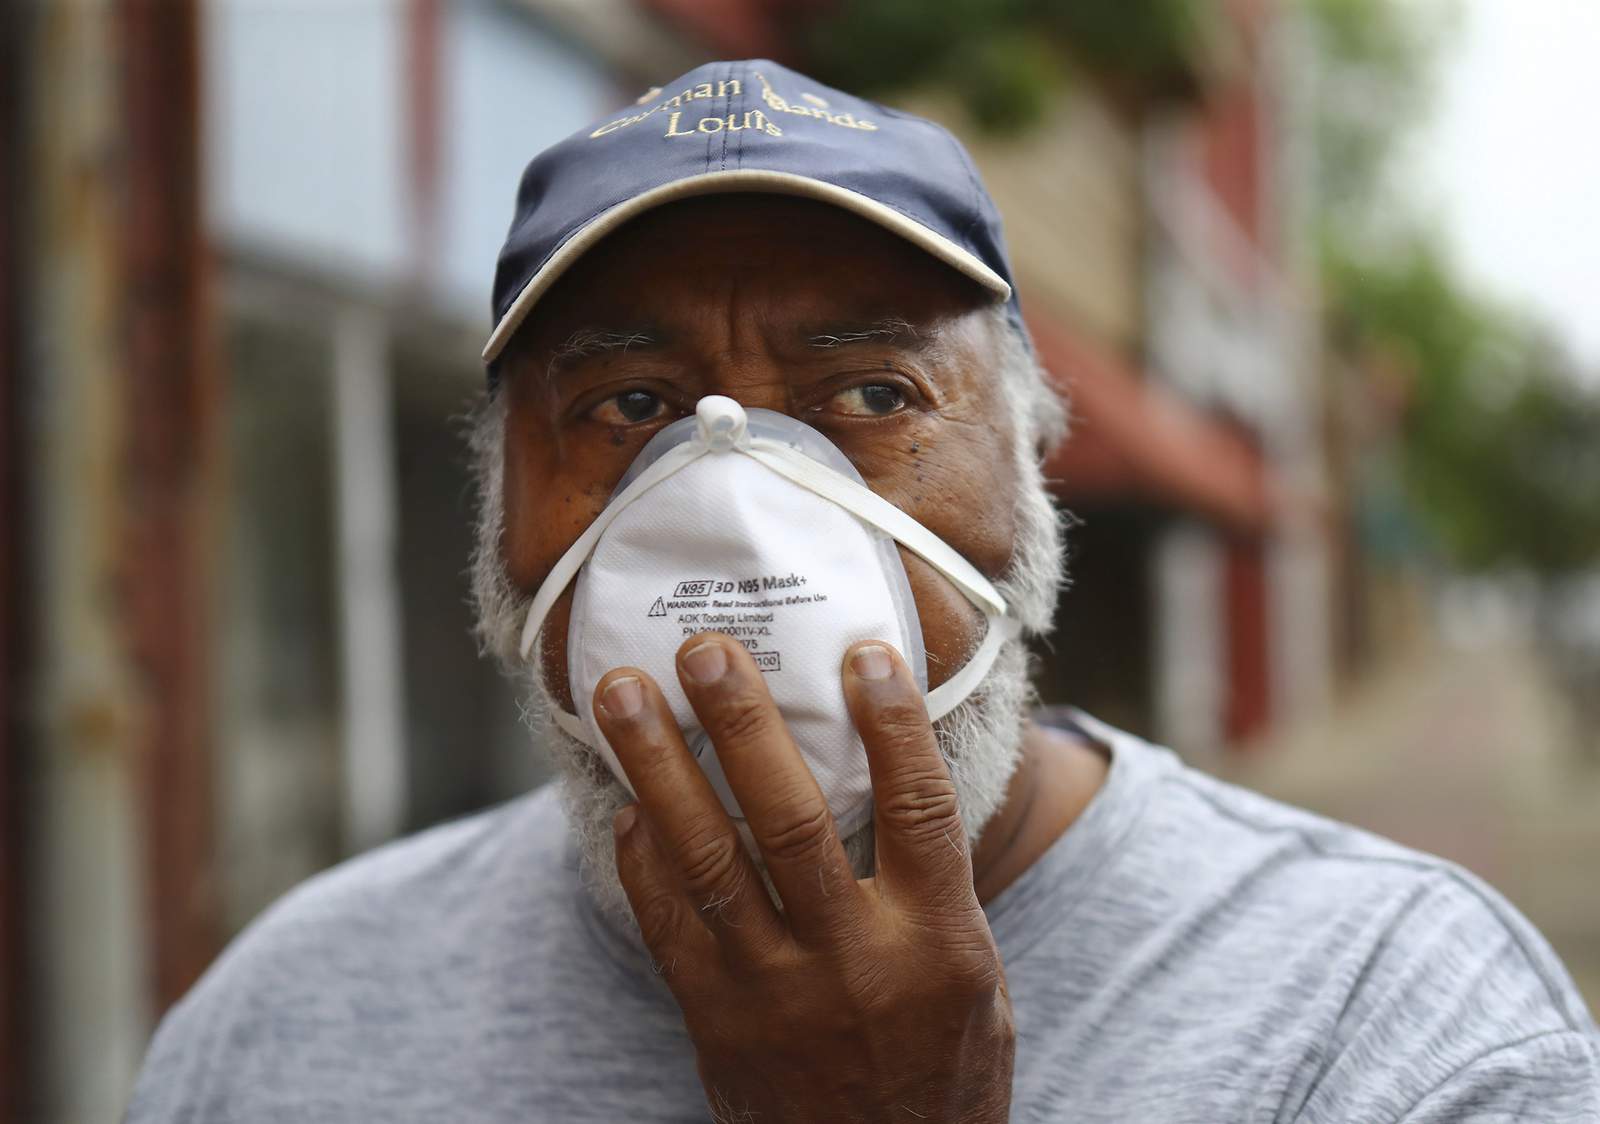 Savannah mayor to require masks in businesses or face fines